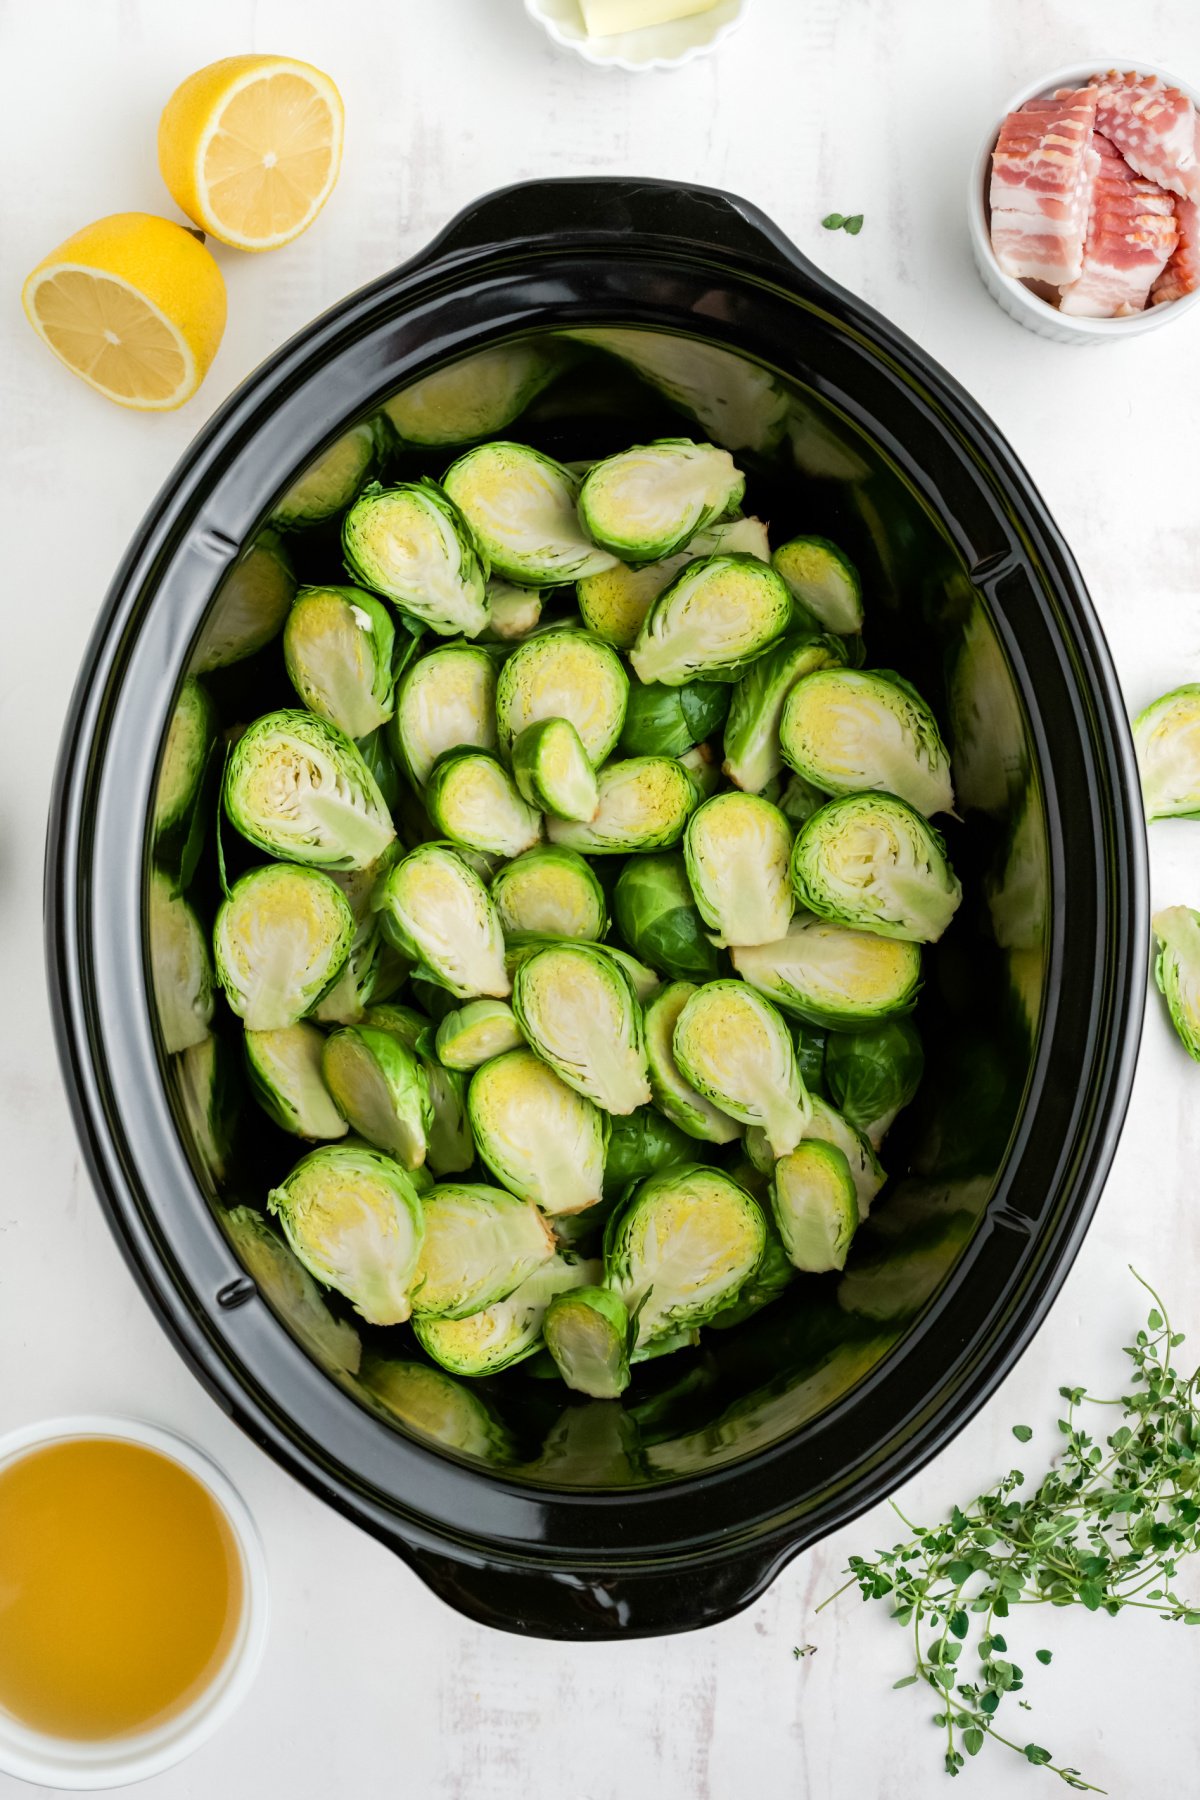 Brussels sprouts in a crockpot before cooking.